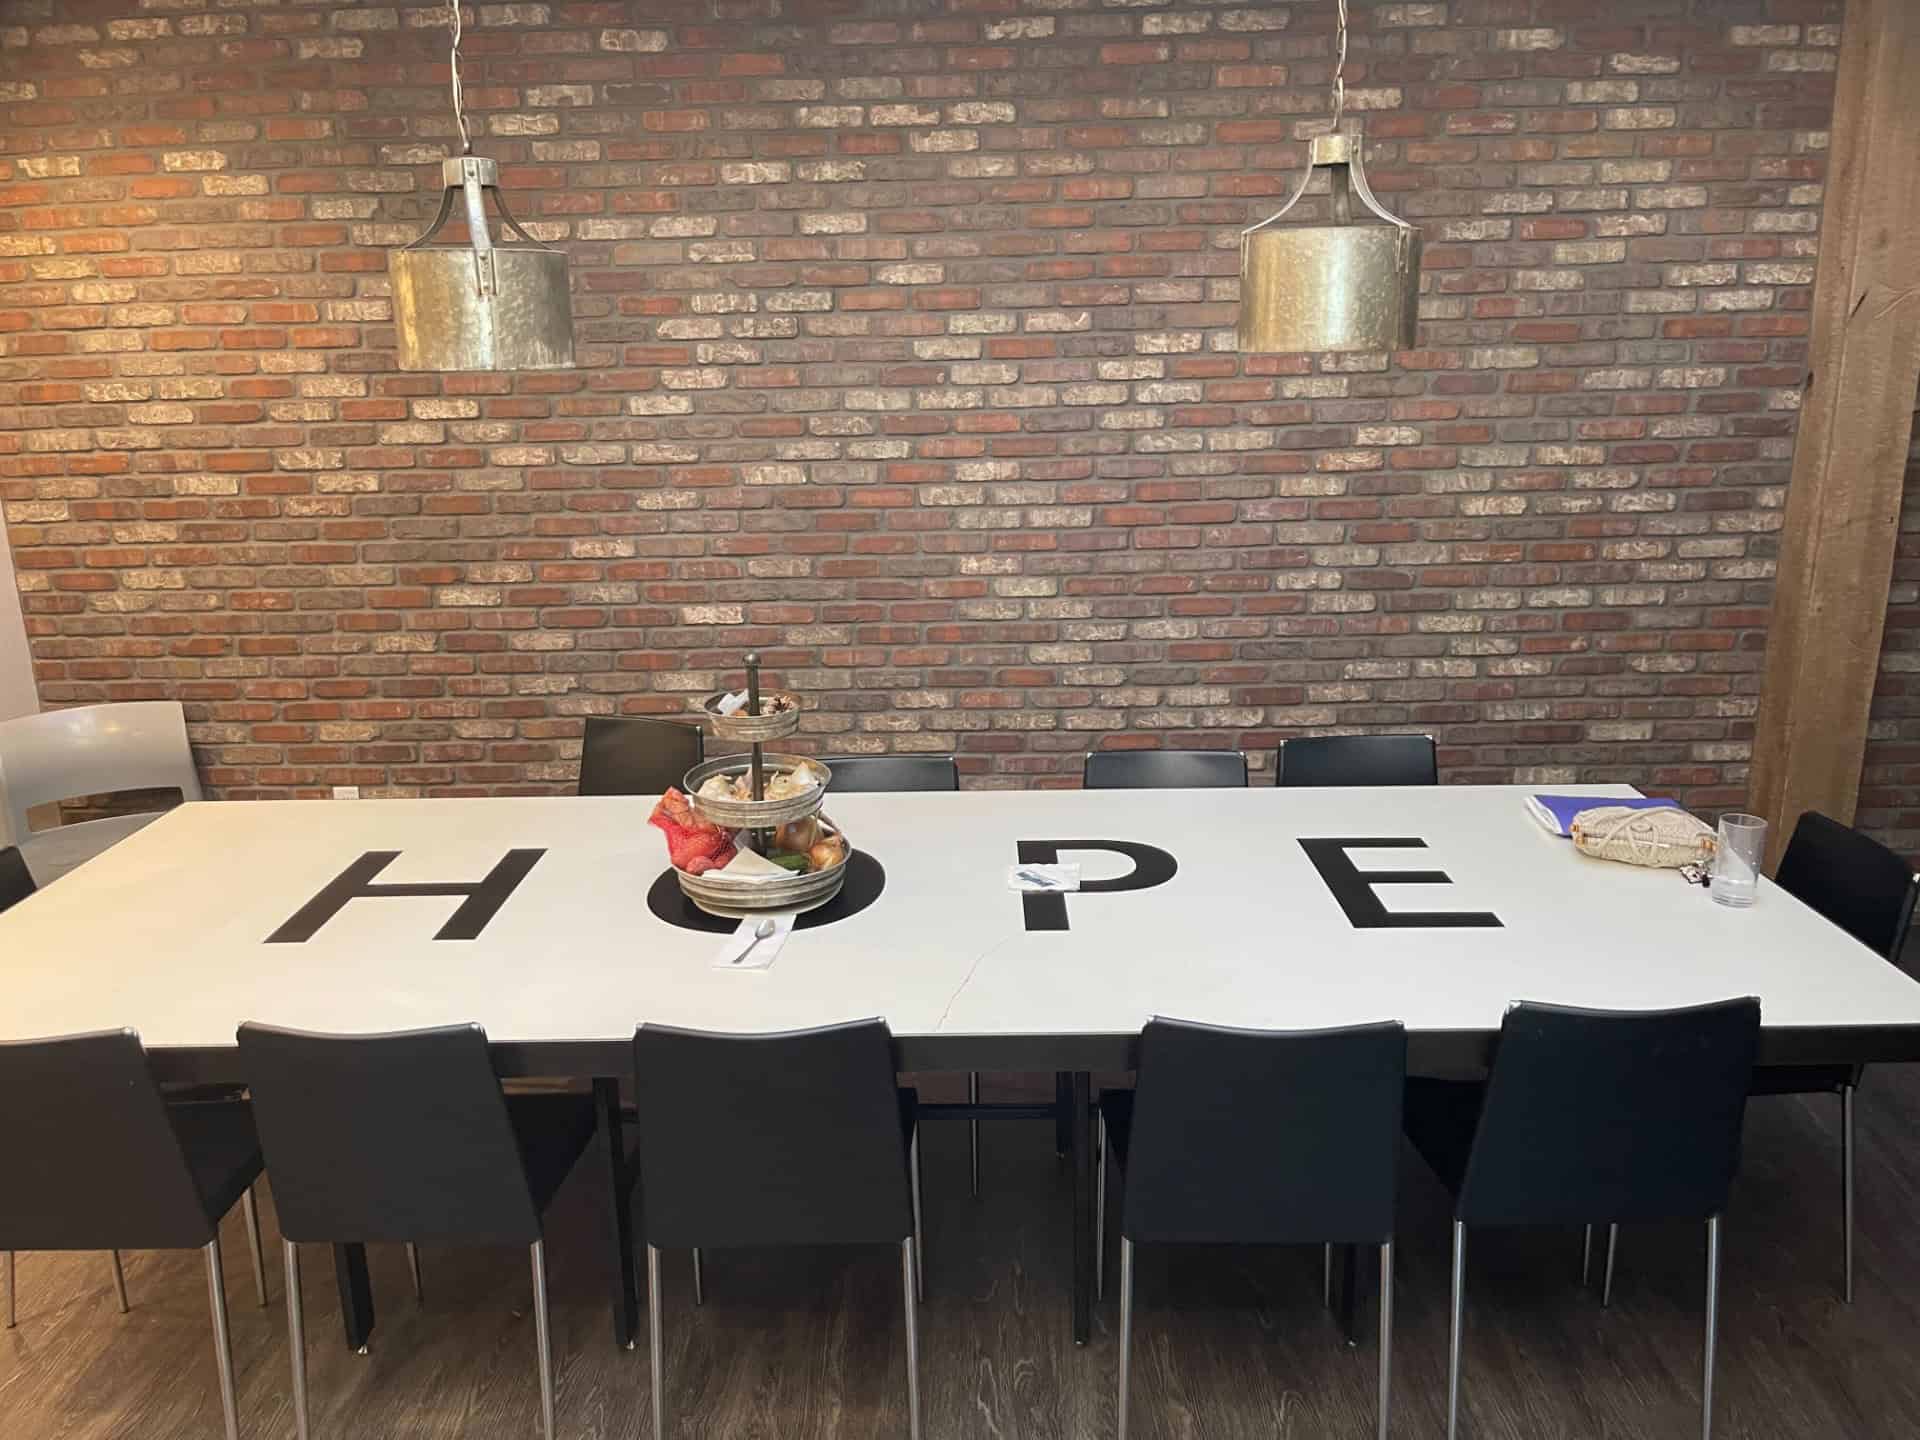 Hope table at Women and Childrens CrossRoads in Reno